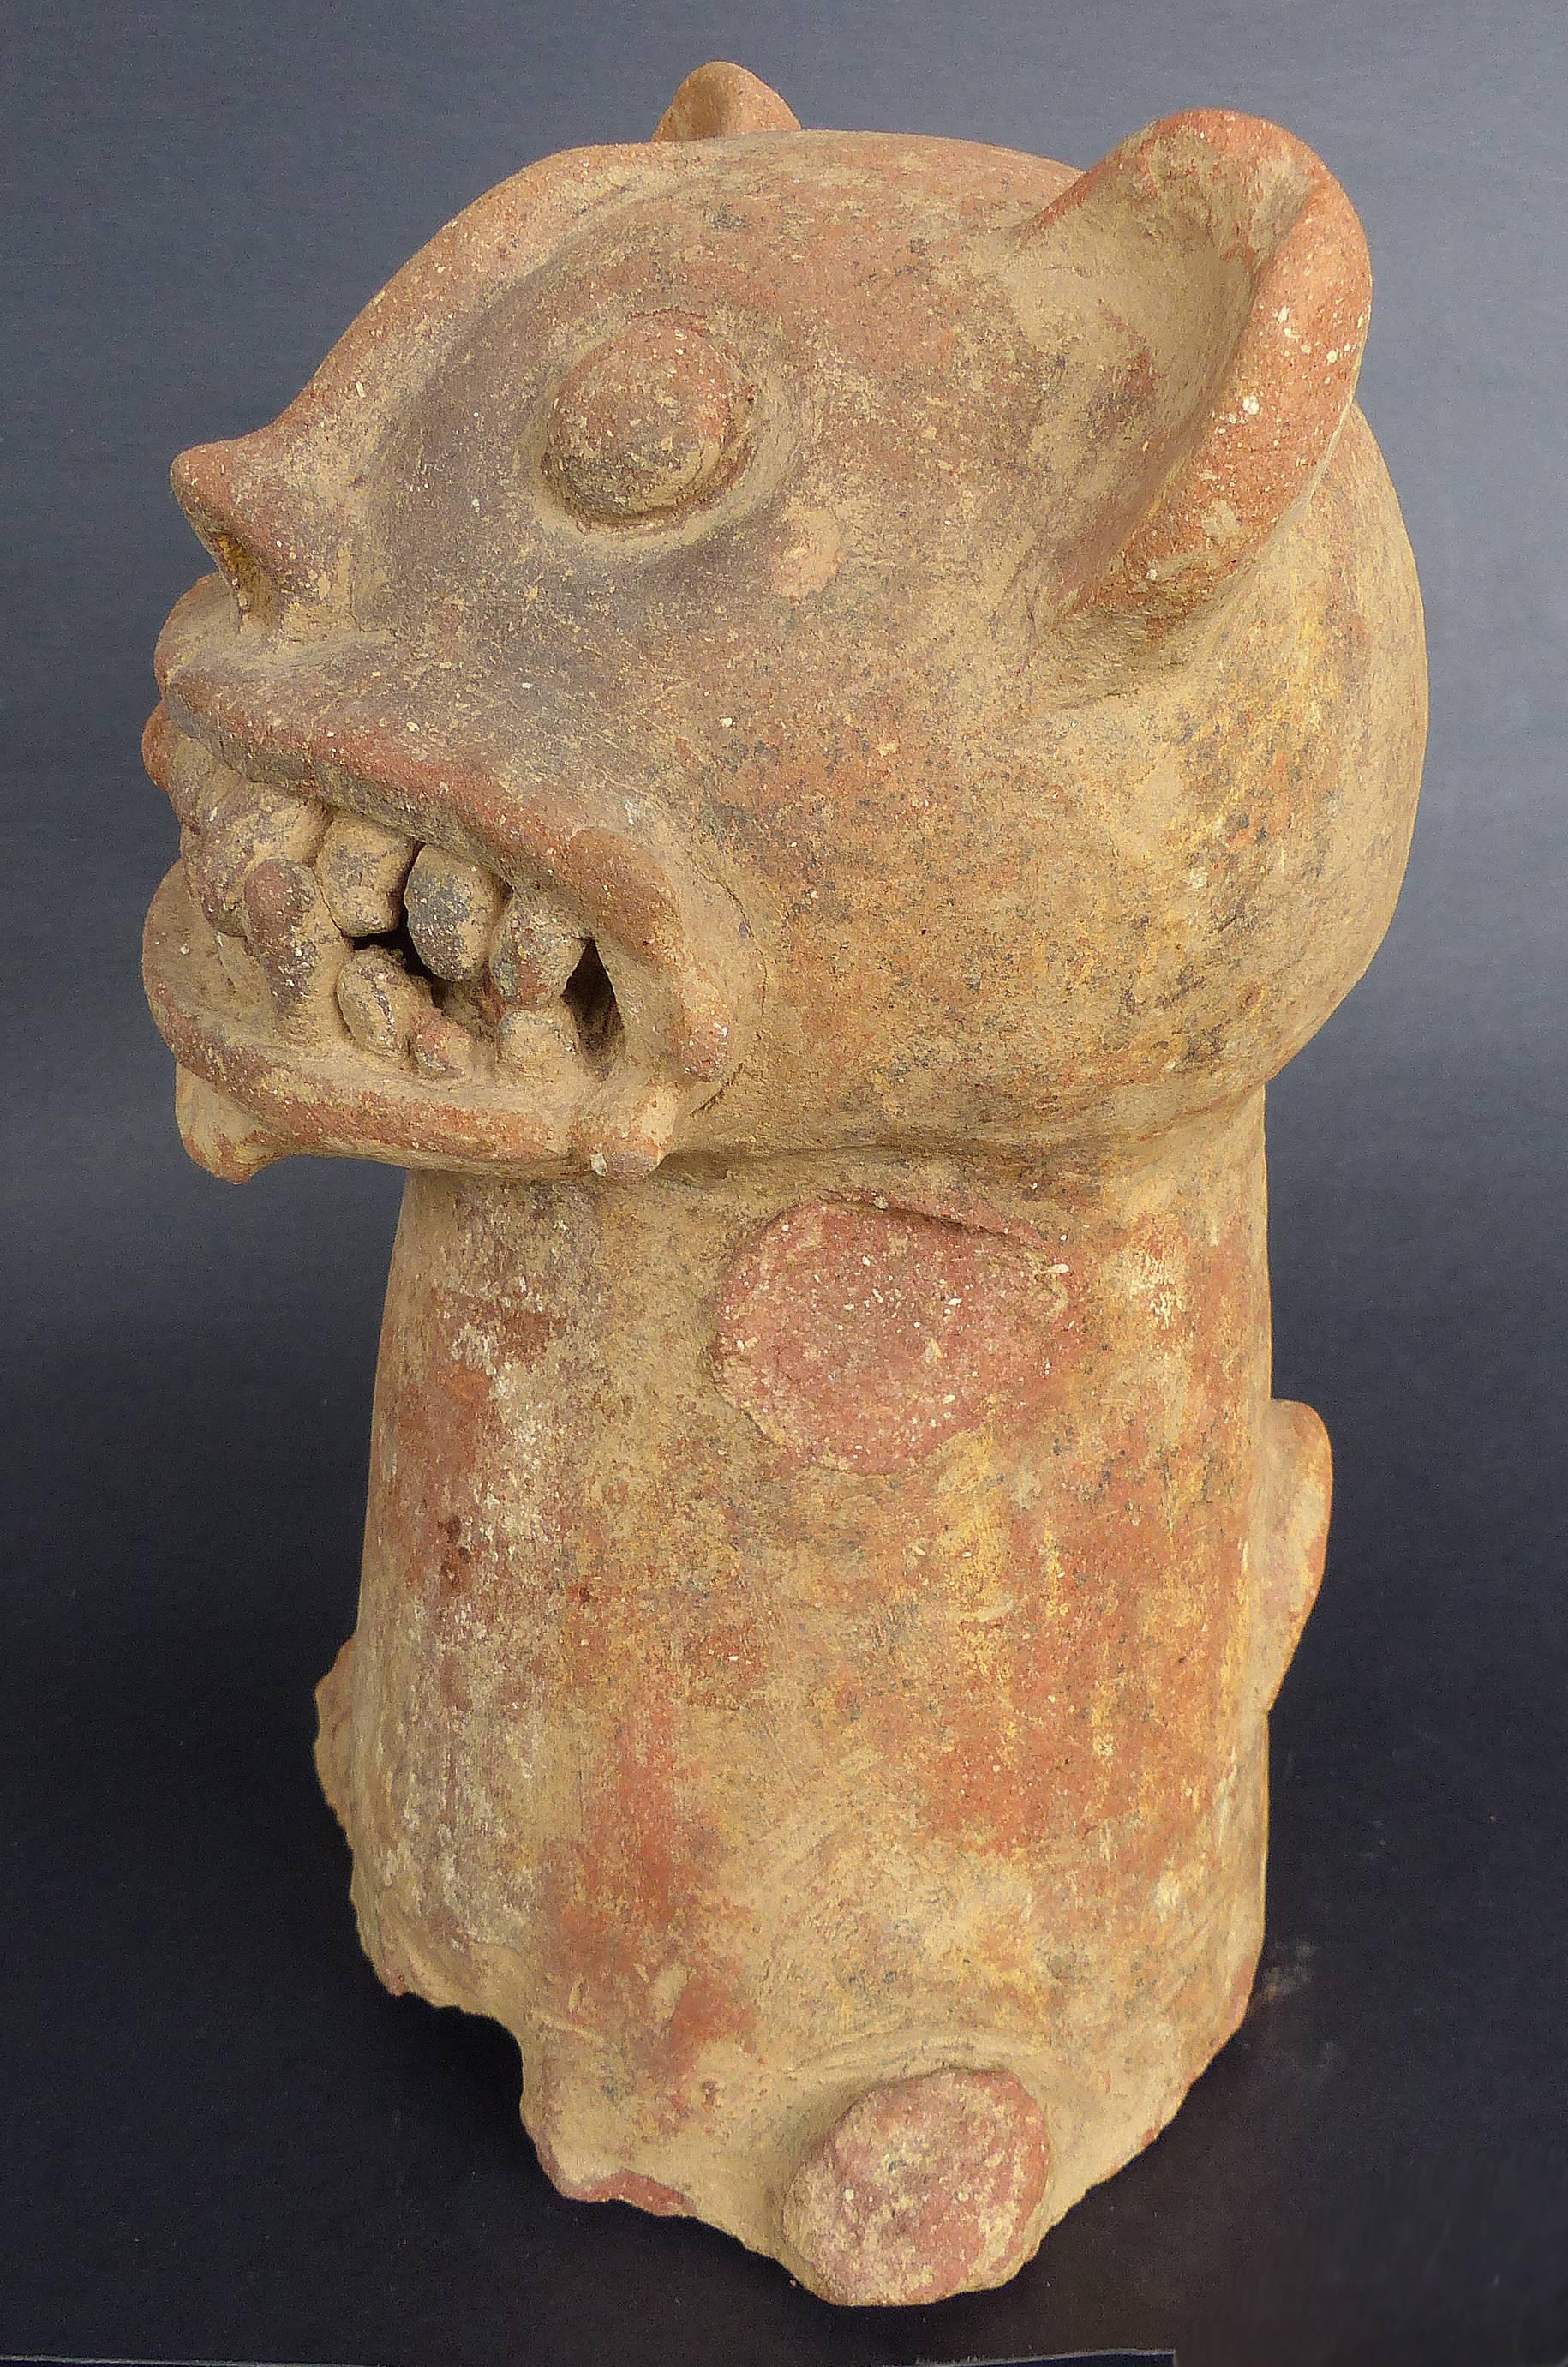 This intriguing terracotta figure of a grotesque animal is believed to be a Pre-Columbian terracotta 